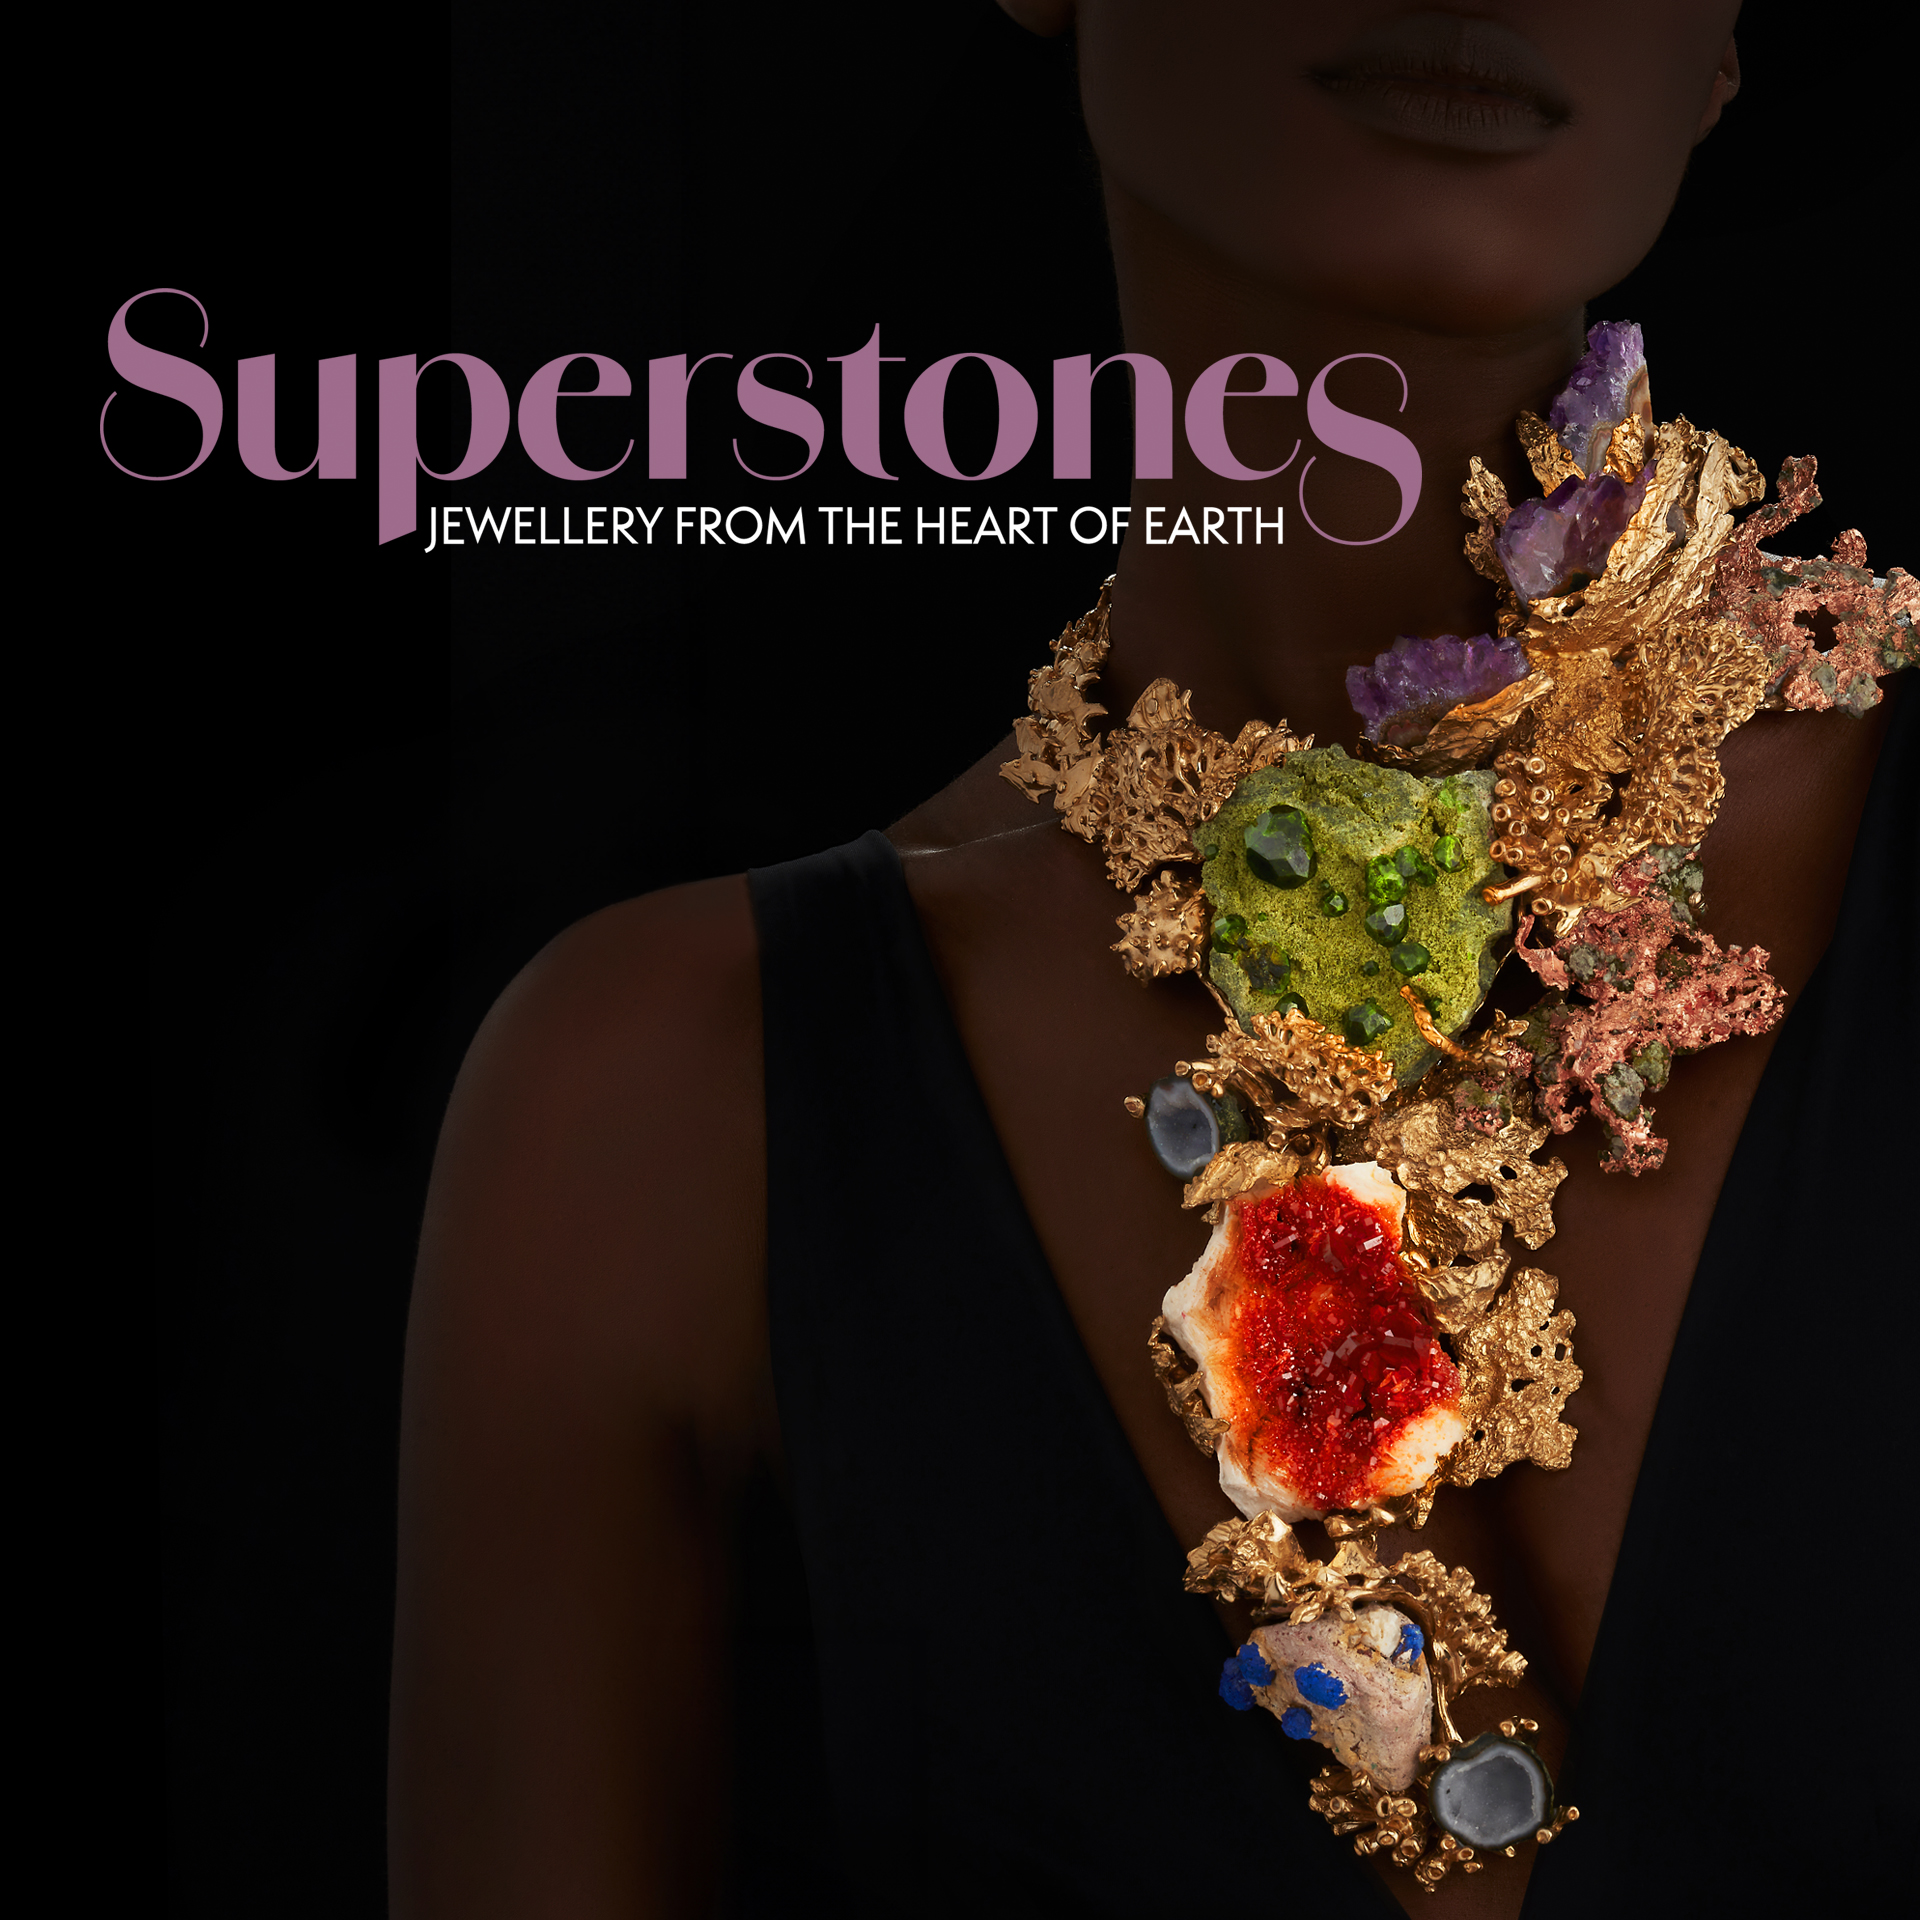 Superstones, jewellery from the hearth of earth